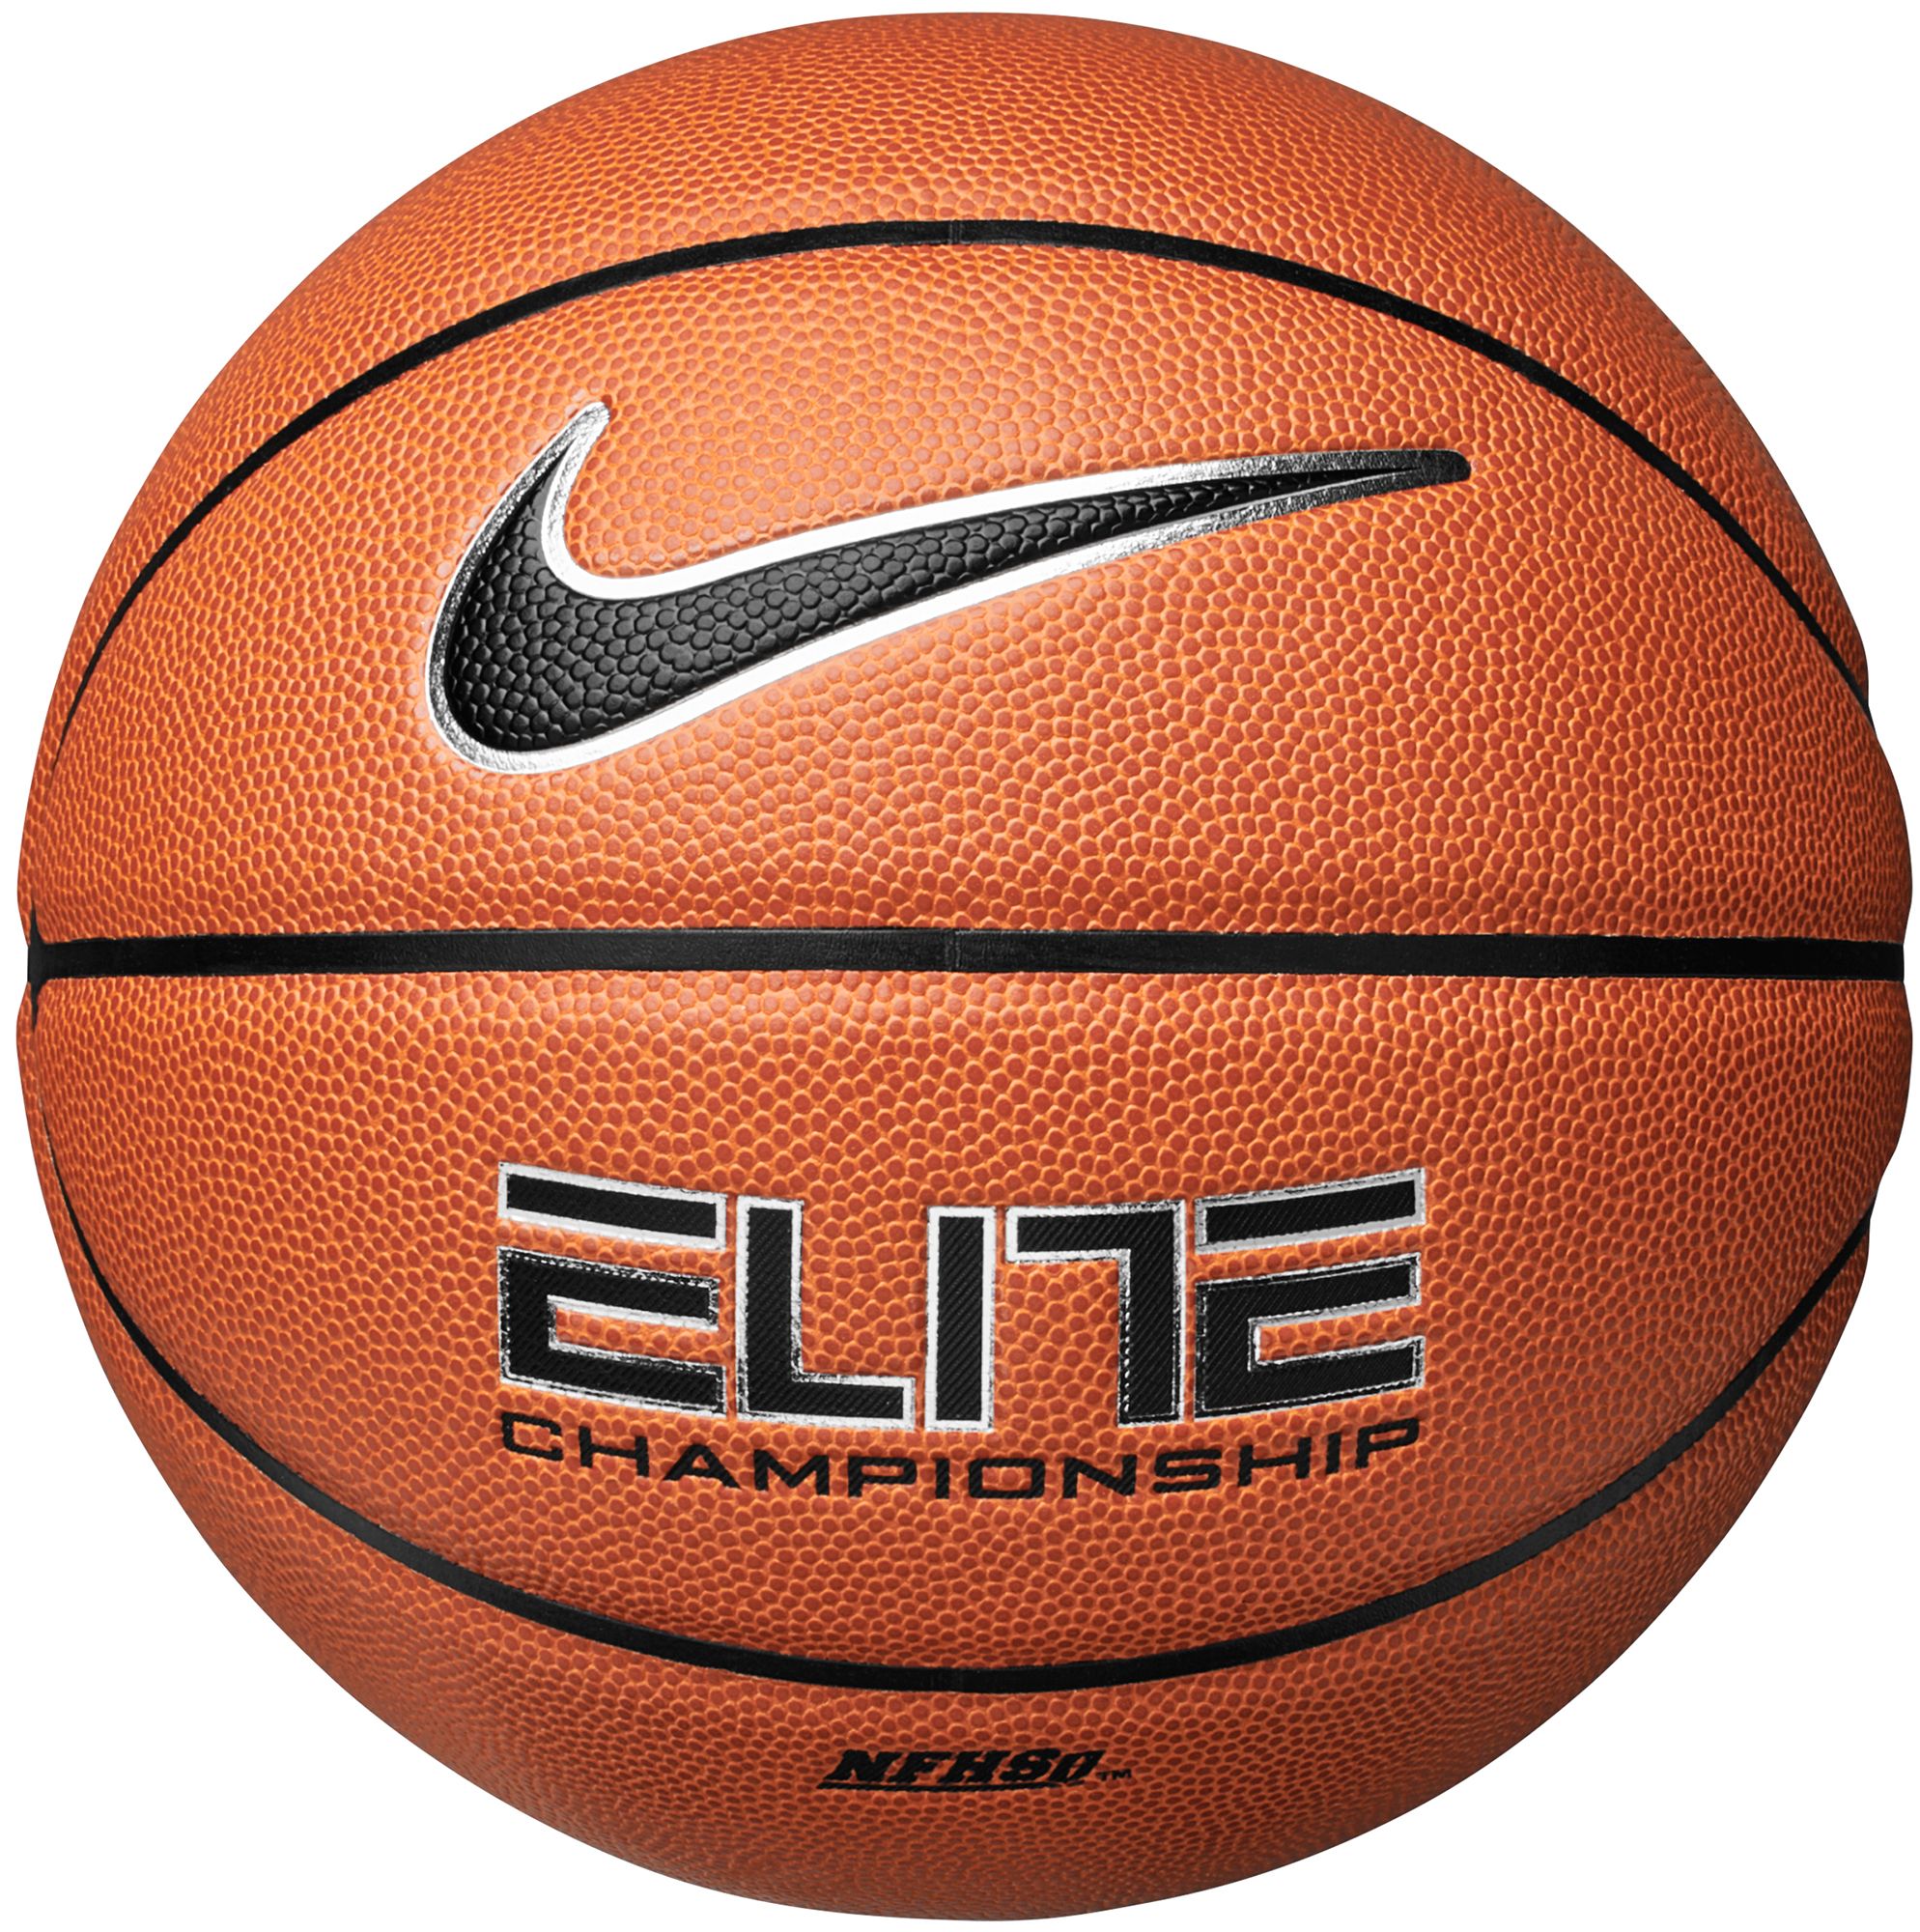 Nike Elite Championship Official Basketball (29.5”) | DICK'S Sporting Goods